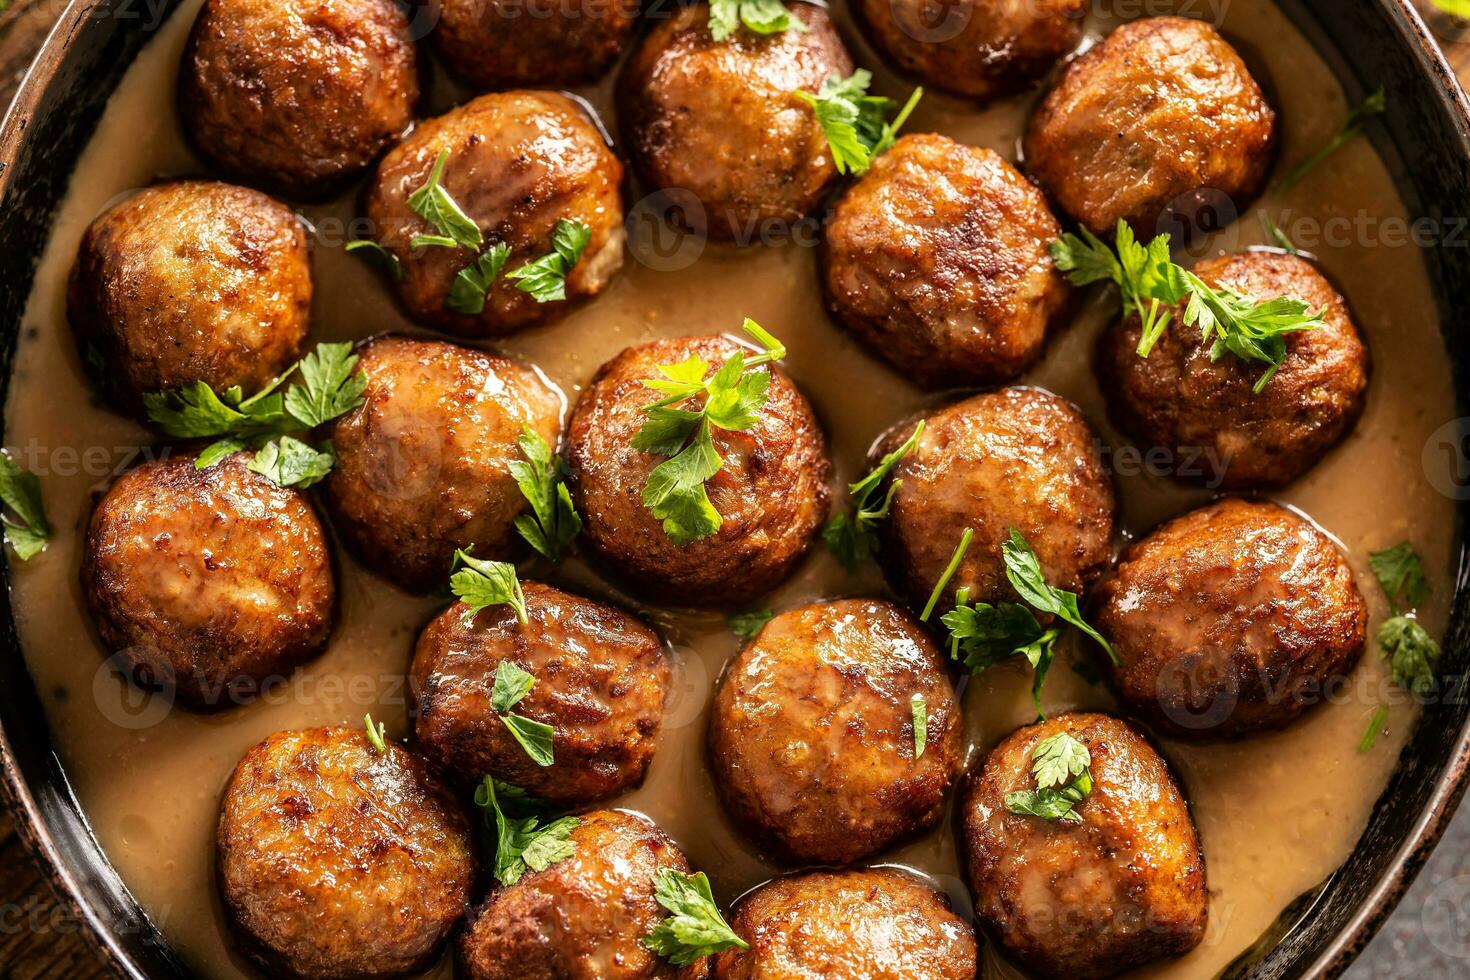 Top view of a pan with freshly-made kottbullar meatballs in a sauce photo